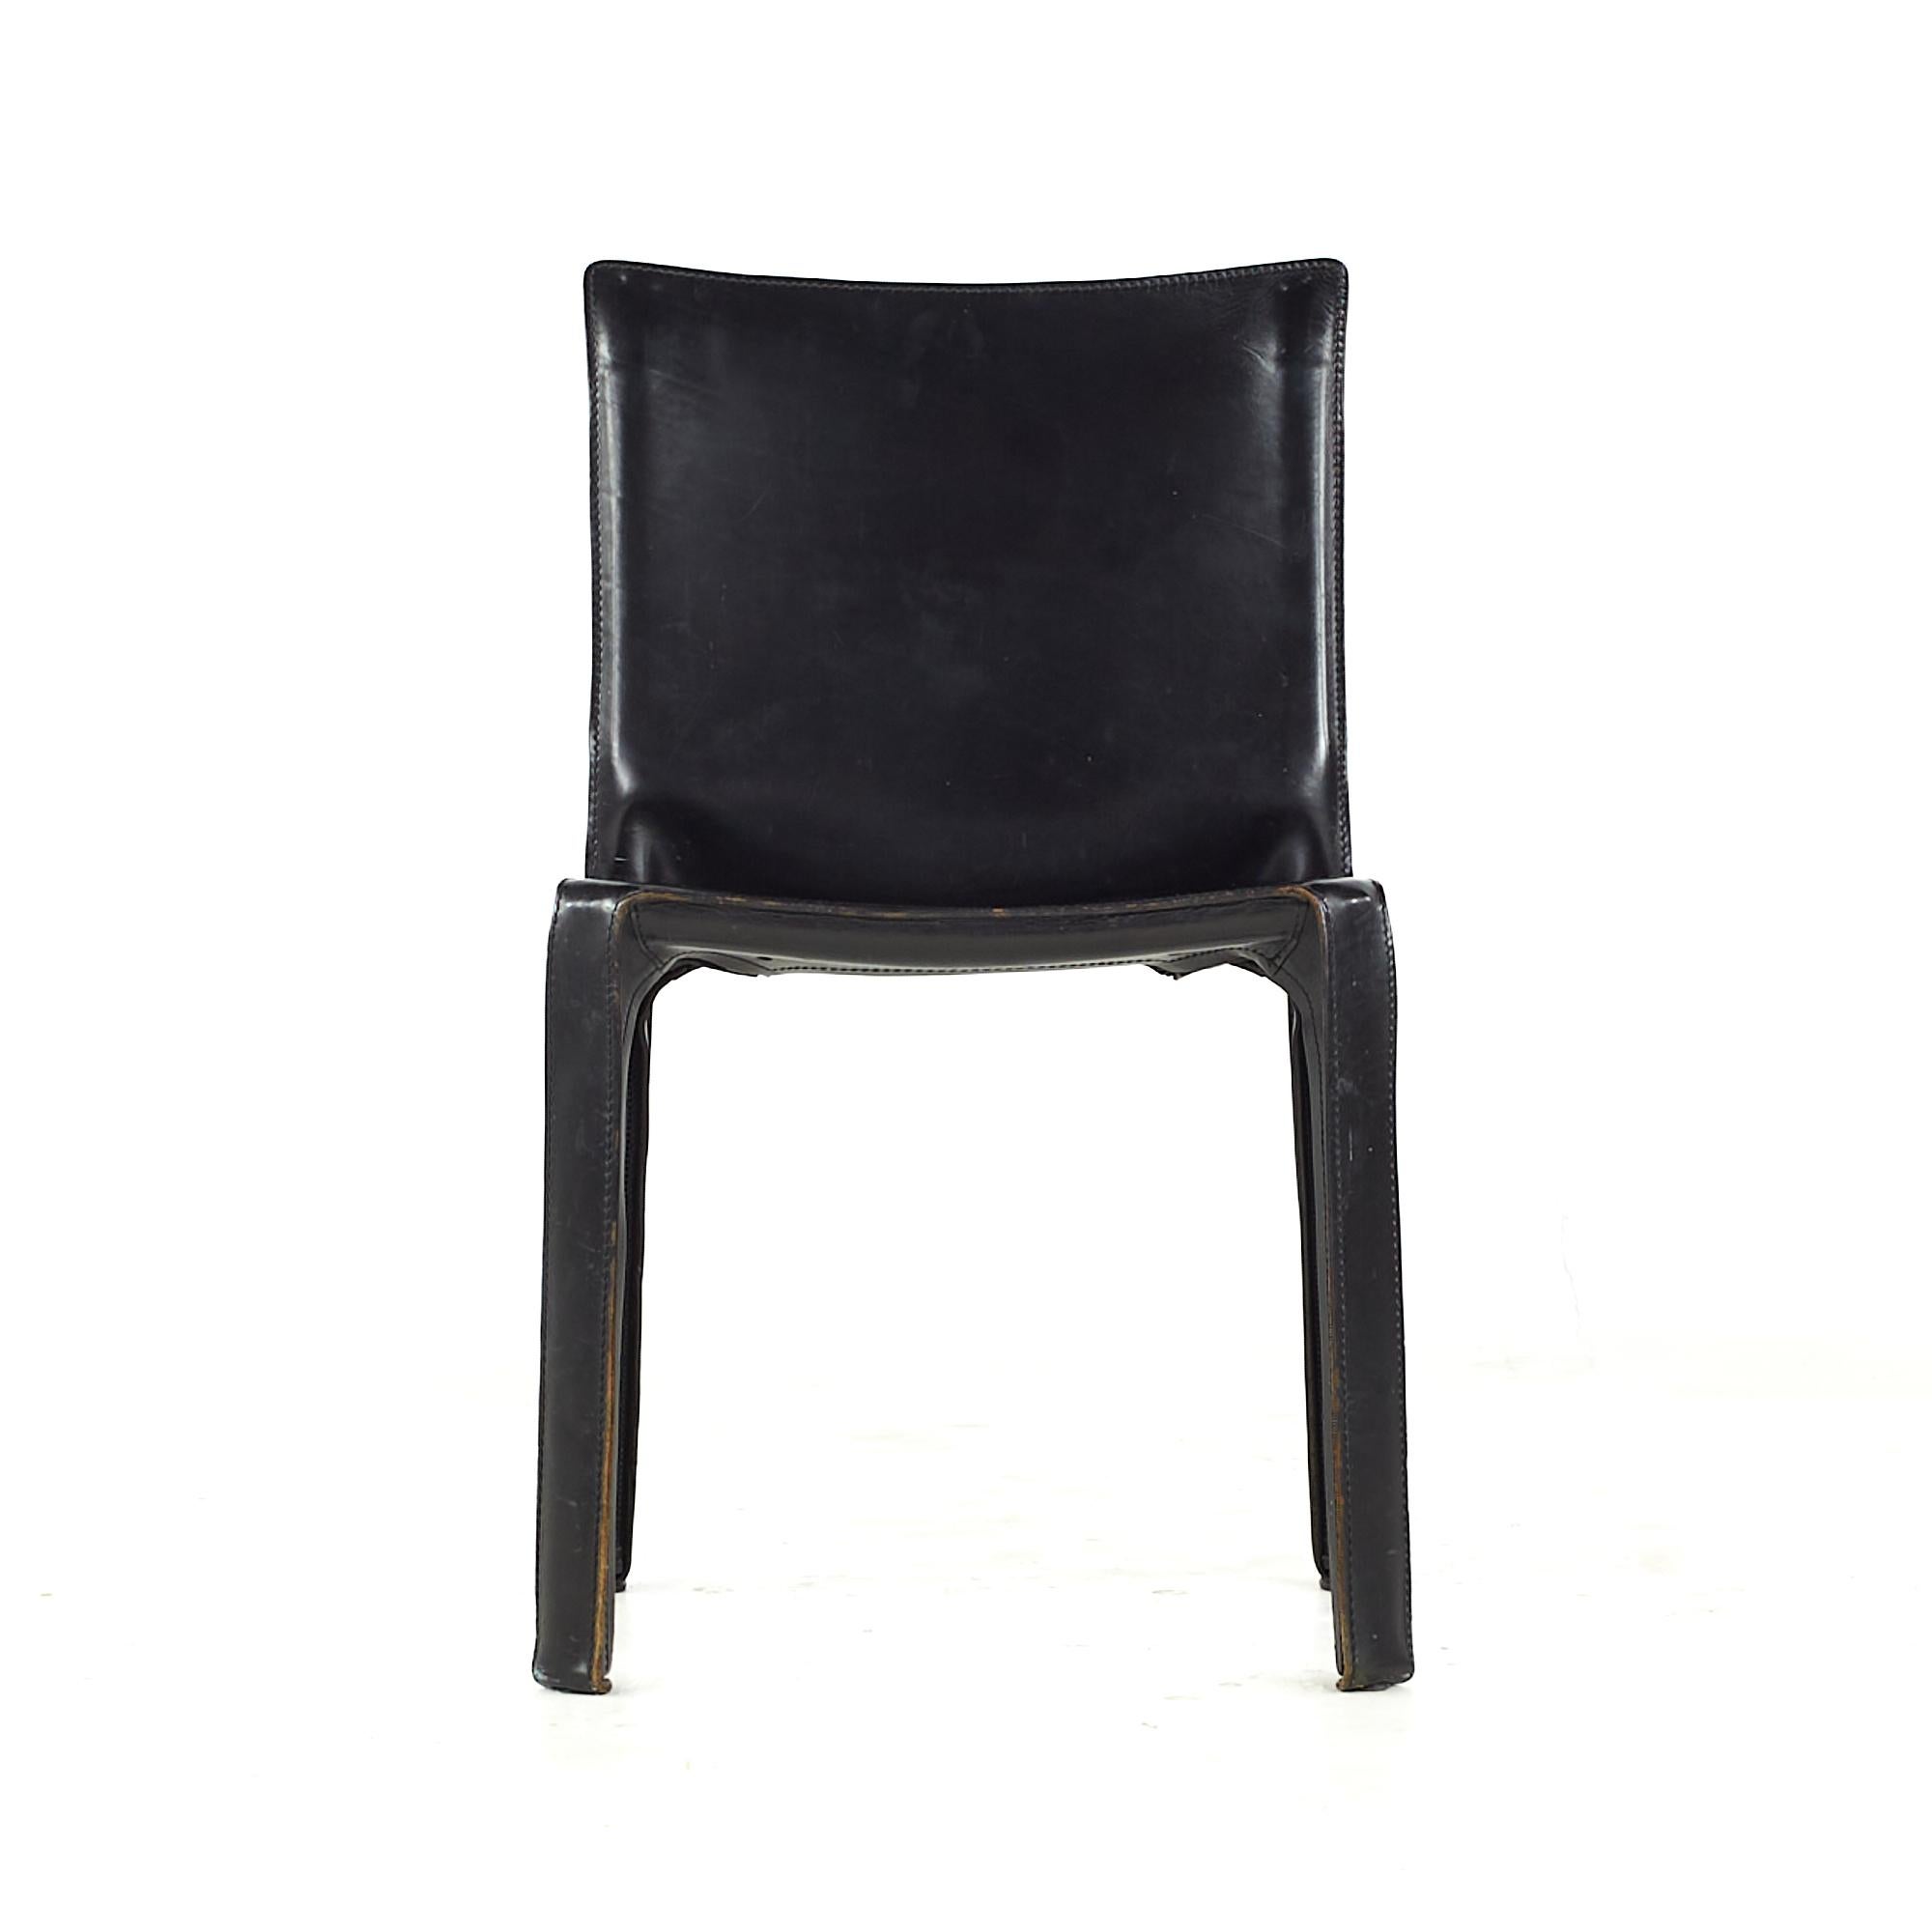 Mario Bellini for Cassina Midcentury Cab Side Chairs, Set of 4 In Good Condition For Sale In Countryside, IL